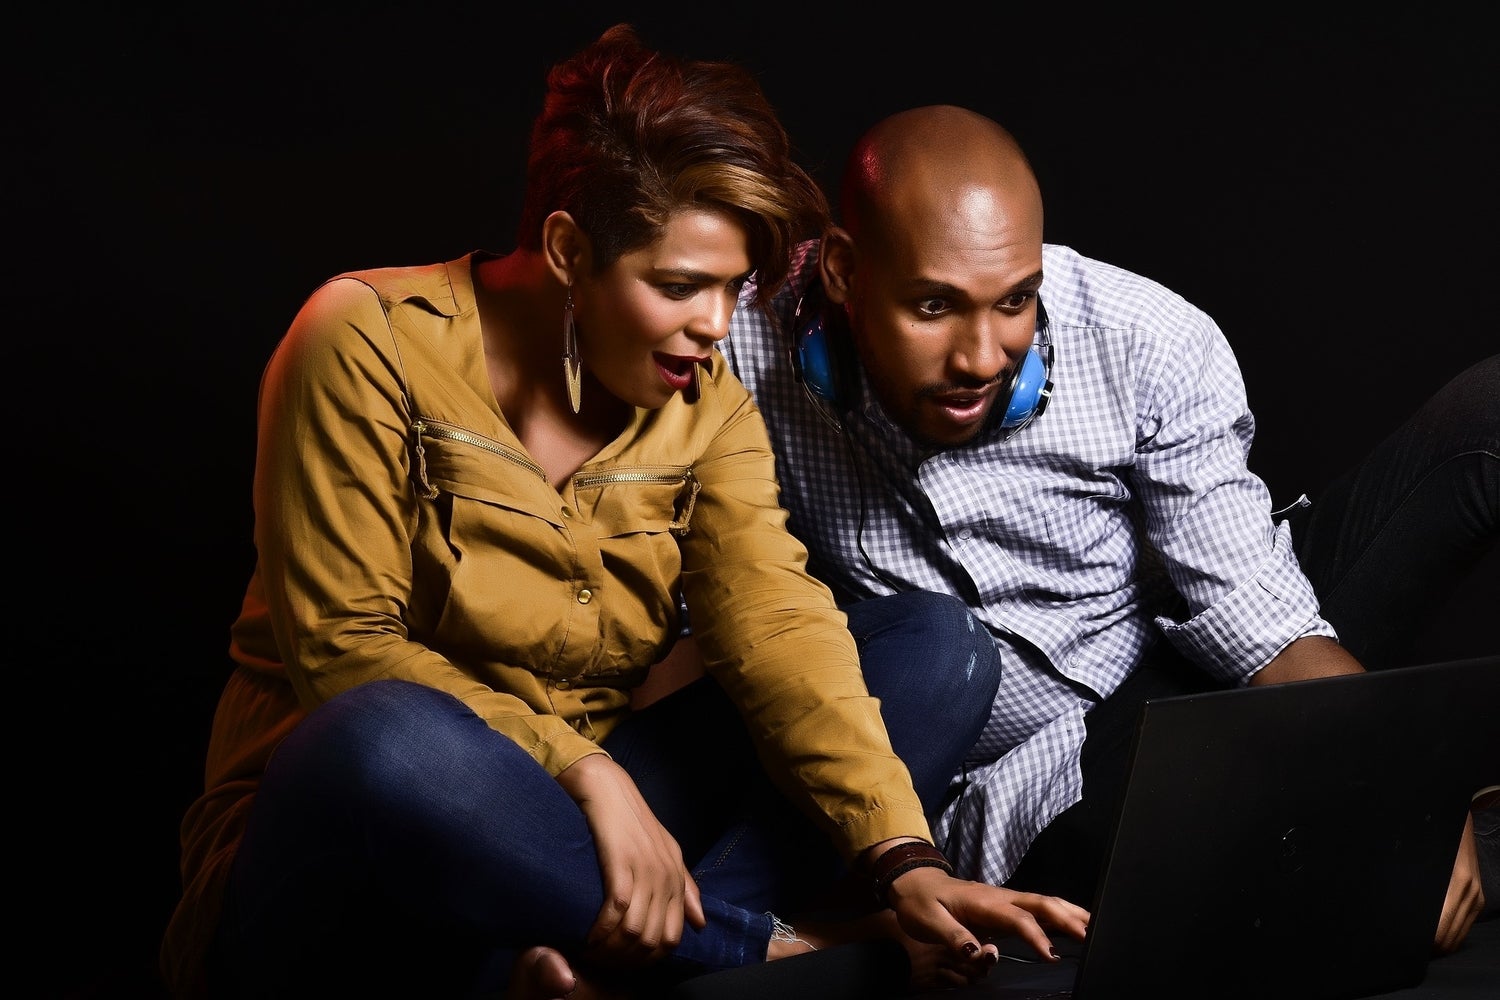 A couple looking surprised at laptop in a dark room.